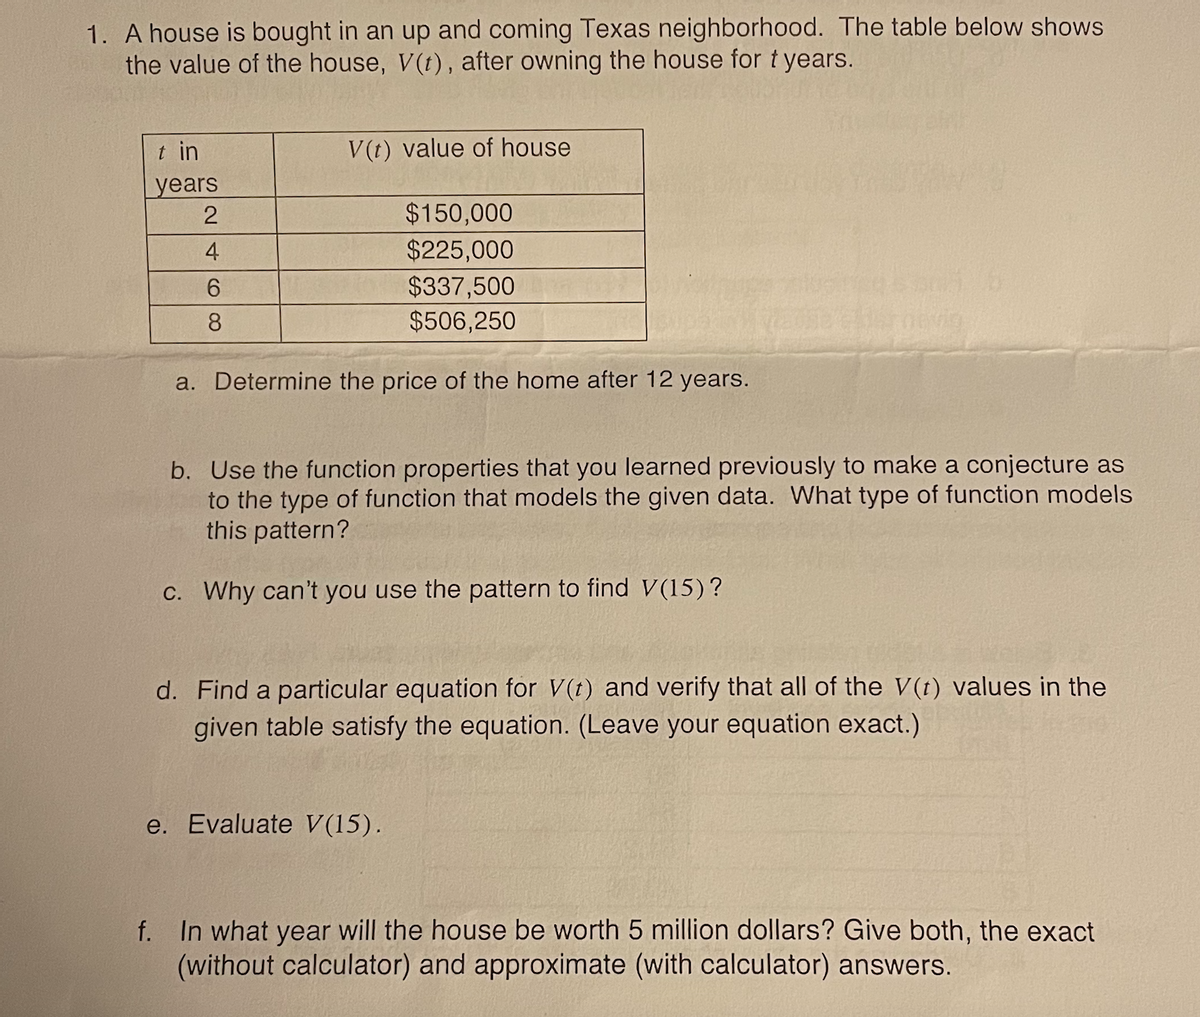 1. A house is bought in an up and coming Texas neighborhood. The table below shows
the value of the house, V(t), after owning the house for t years.
t in
V(t) value of house
years
$150,000
4
$225,000
6.
$337,500
8.
$506,250
a. Determine the price of the home after 12 years.
b. Use the function properties that you learned previously to make a conjecture as
to the type of function that models the given data. What type of function models
this pattern?
C. Why can't you use the pattern to find V(15)?
d. Find a particular equation for V(t) and verify that all of the V(t) values in the
given table satisfy the equation. (Leave your equation exact.)
e. Evaluate V(15).
f. In what year will the house be worth 5 million dollars? Give both, the exact
(without calculator) and approximate (with calculator) answers.
